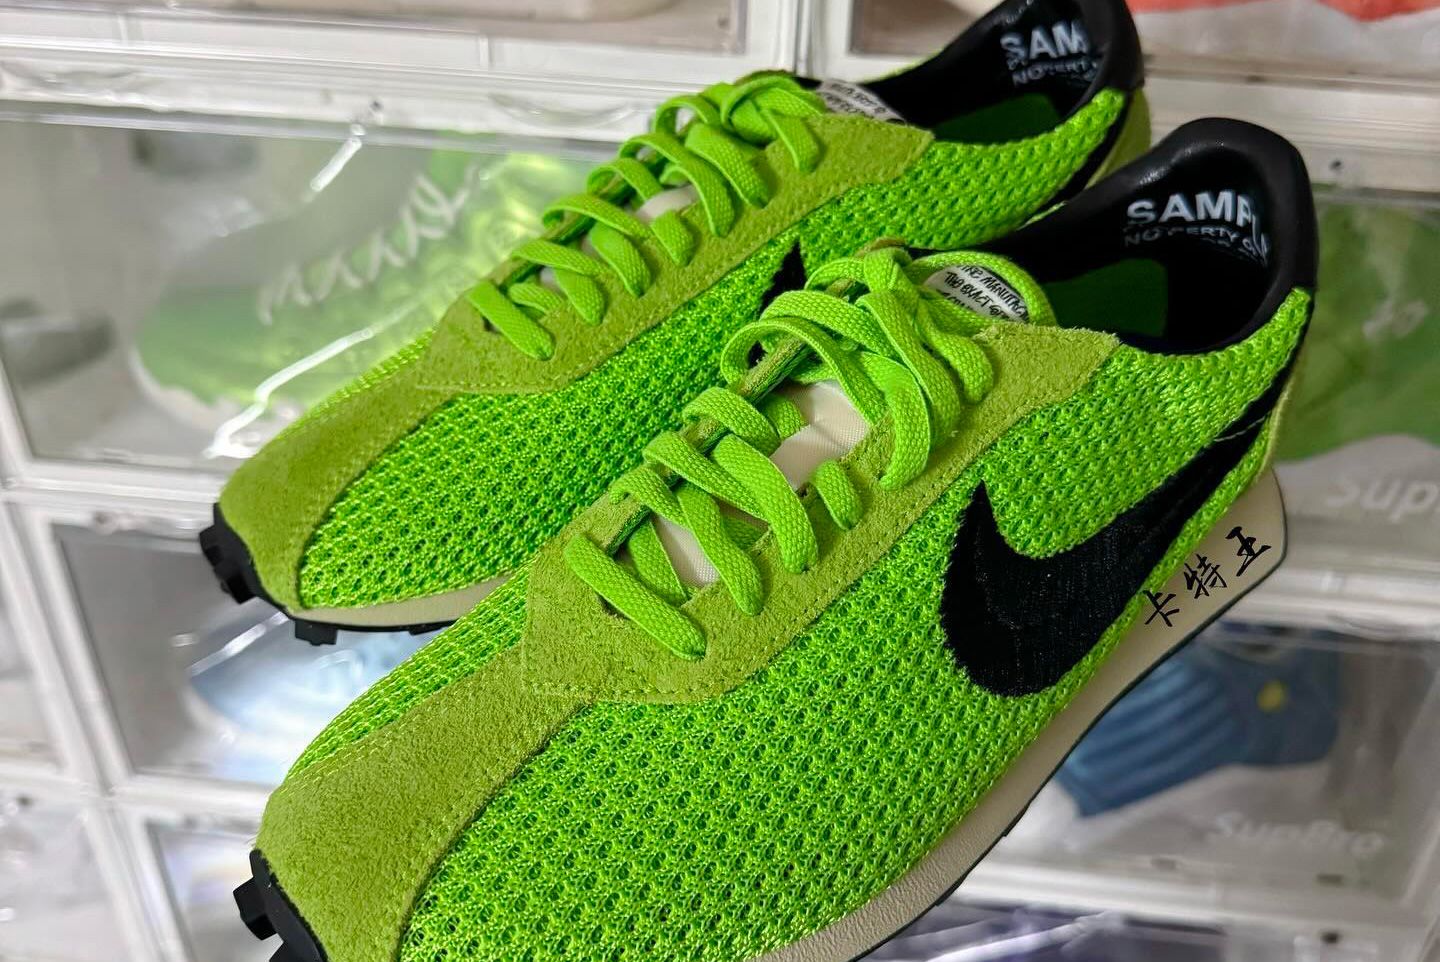 Stussy Nike LD 1000 Soccer Sneakers Neon Green Collaboration